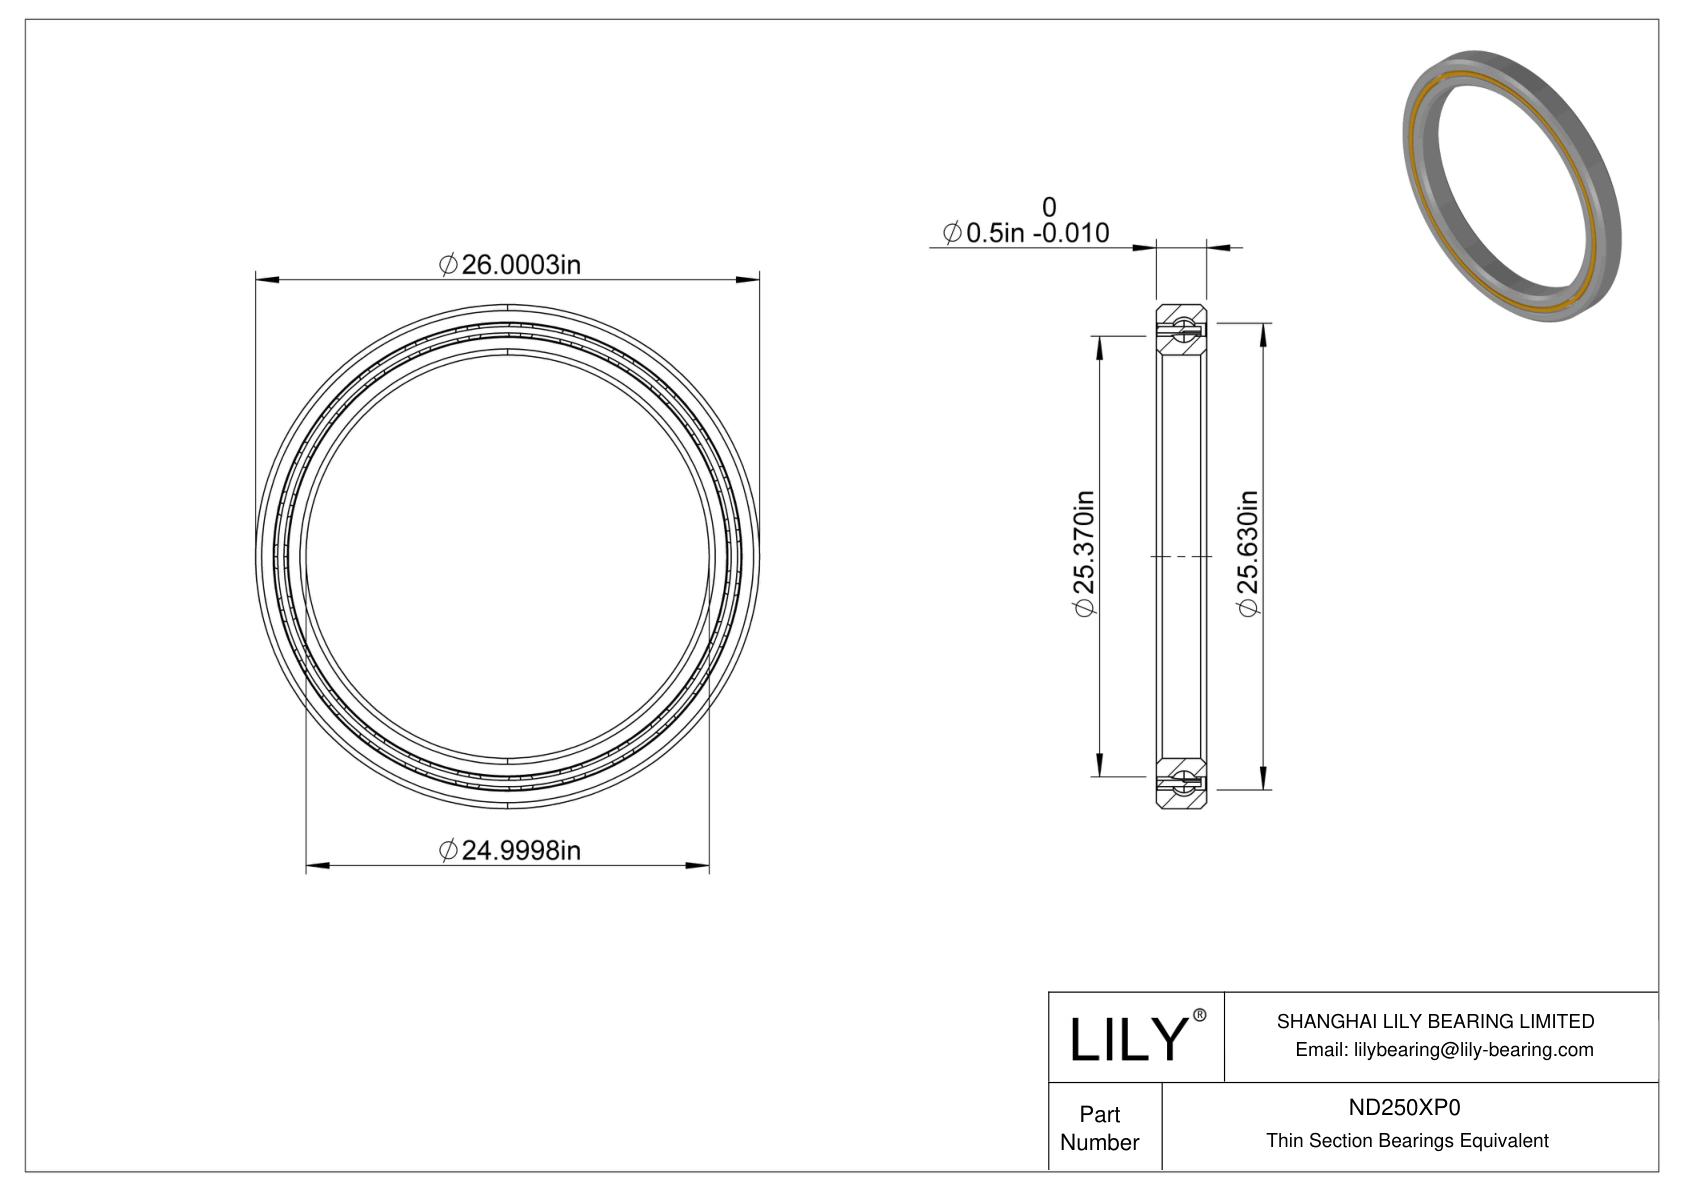 ND250XP0 Constant Section (CS) Bearings cad drawing